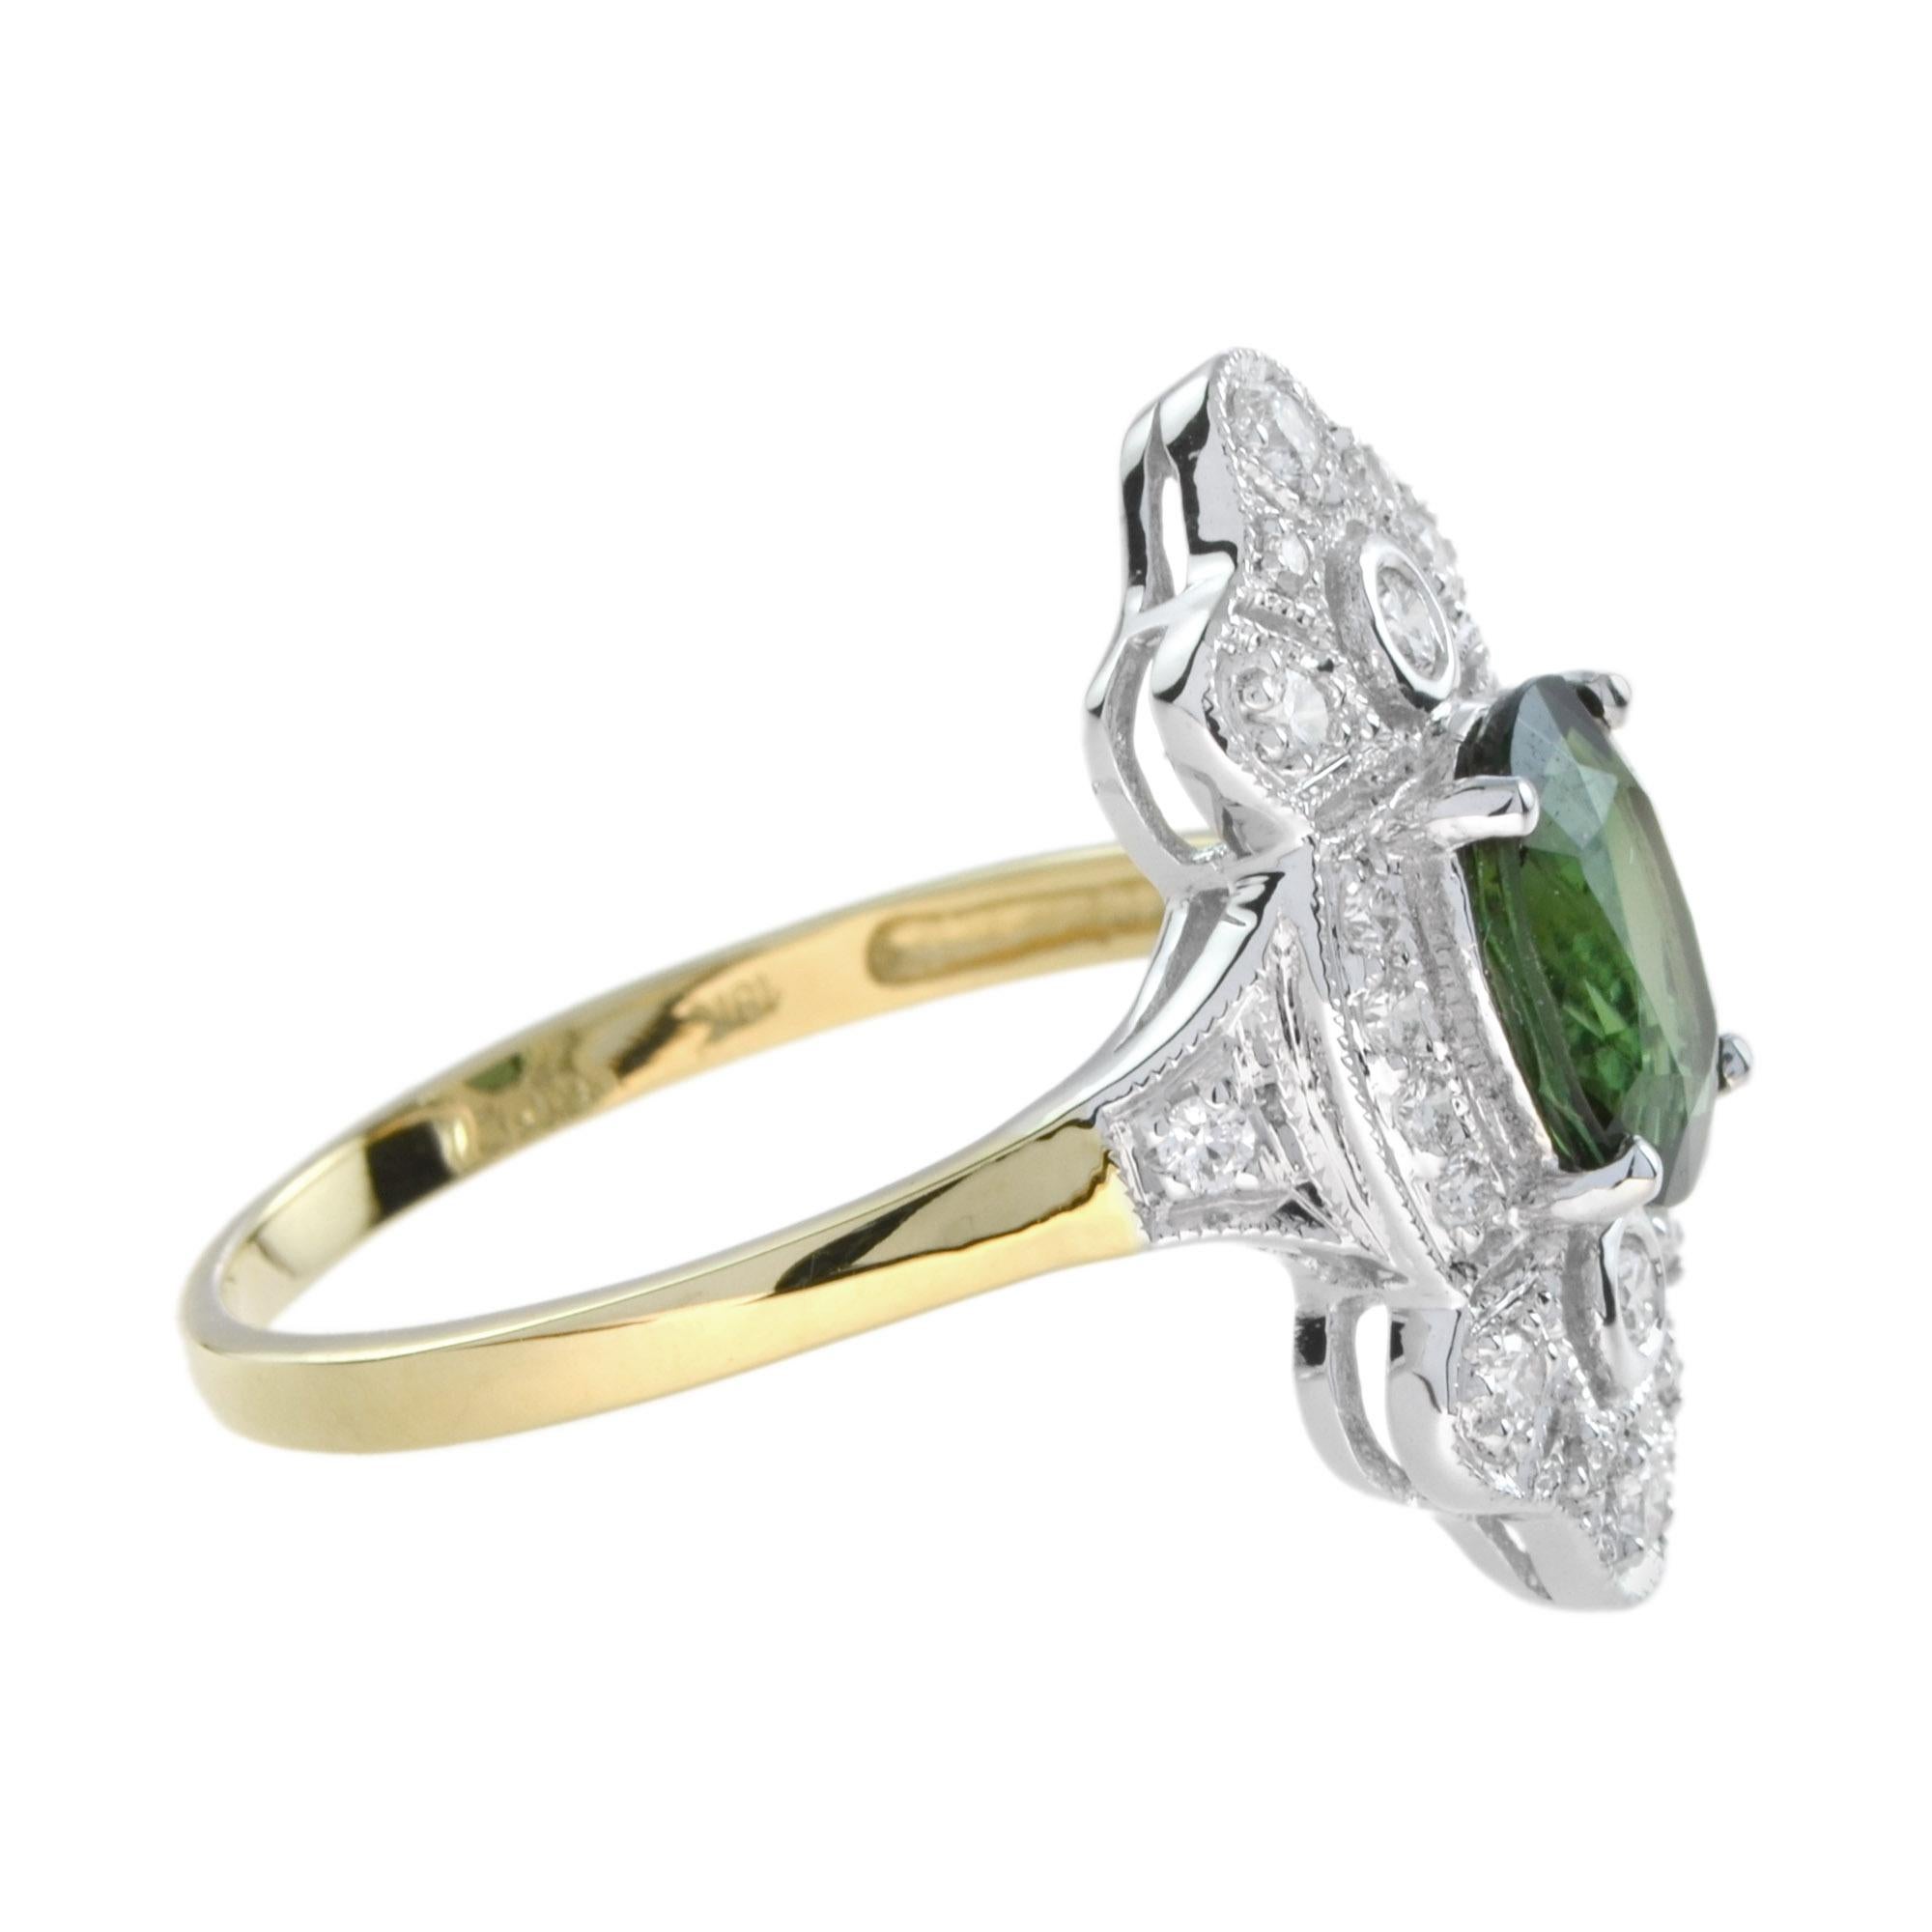 For Sale:  Art Deco Style Oval Green Tourmaline with Diamond Halo Ring in 18K Yellow Gold 3